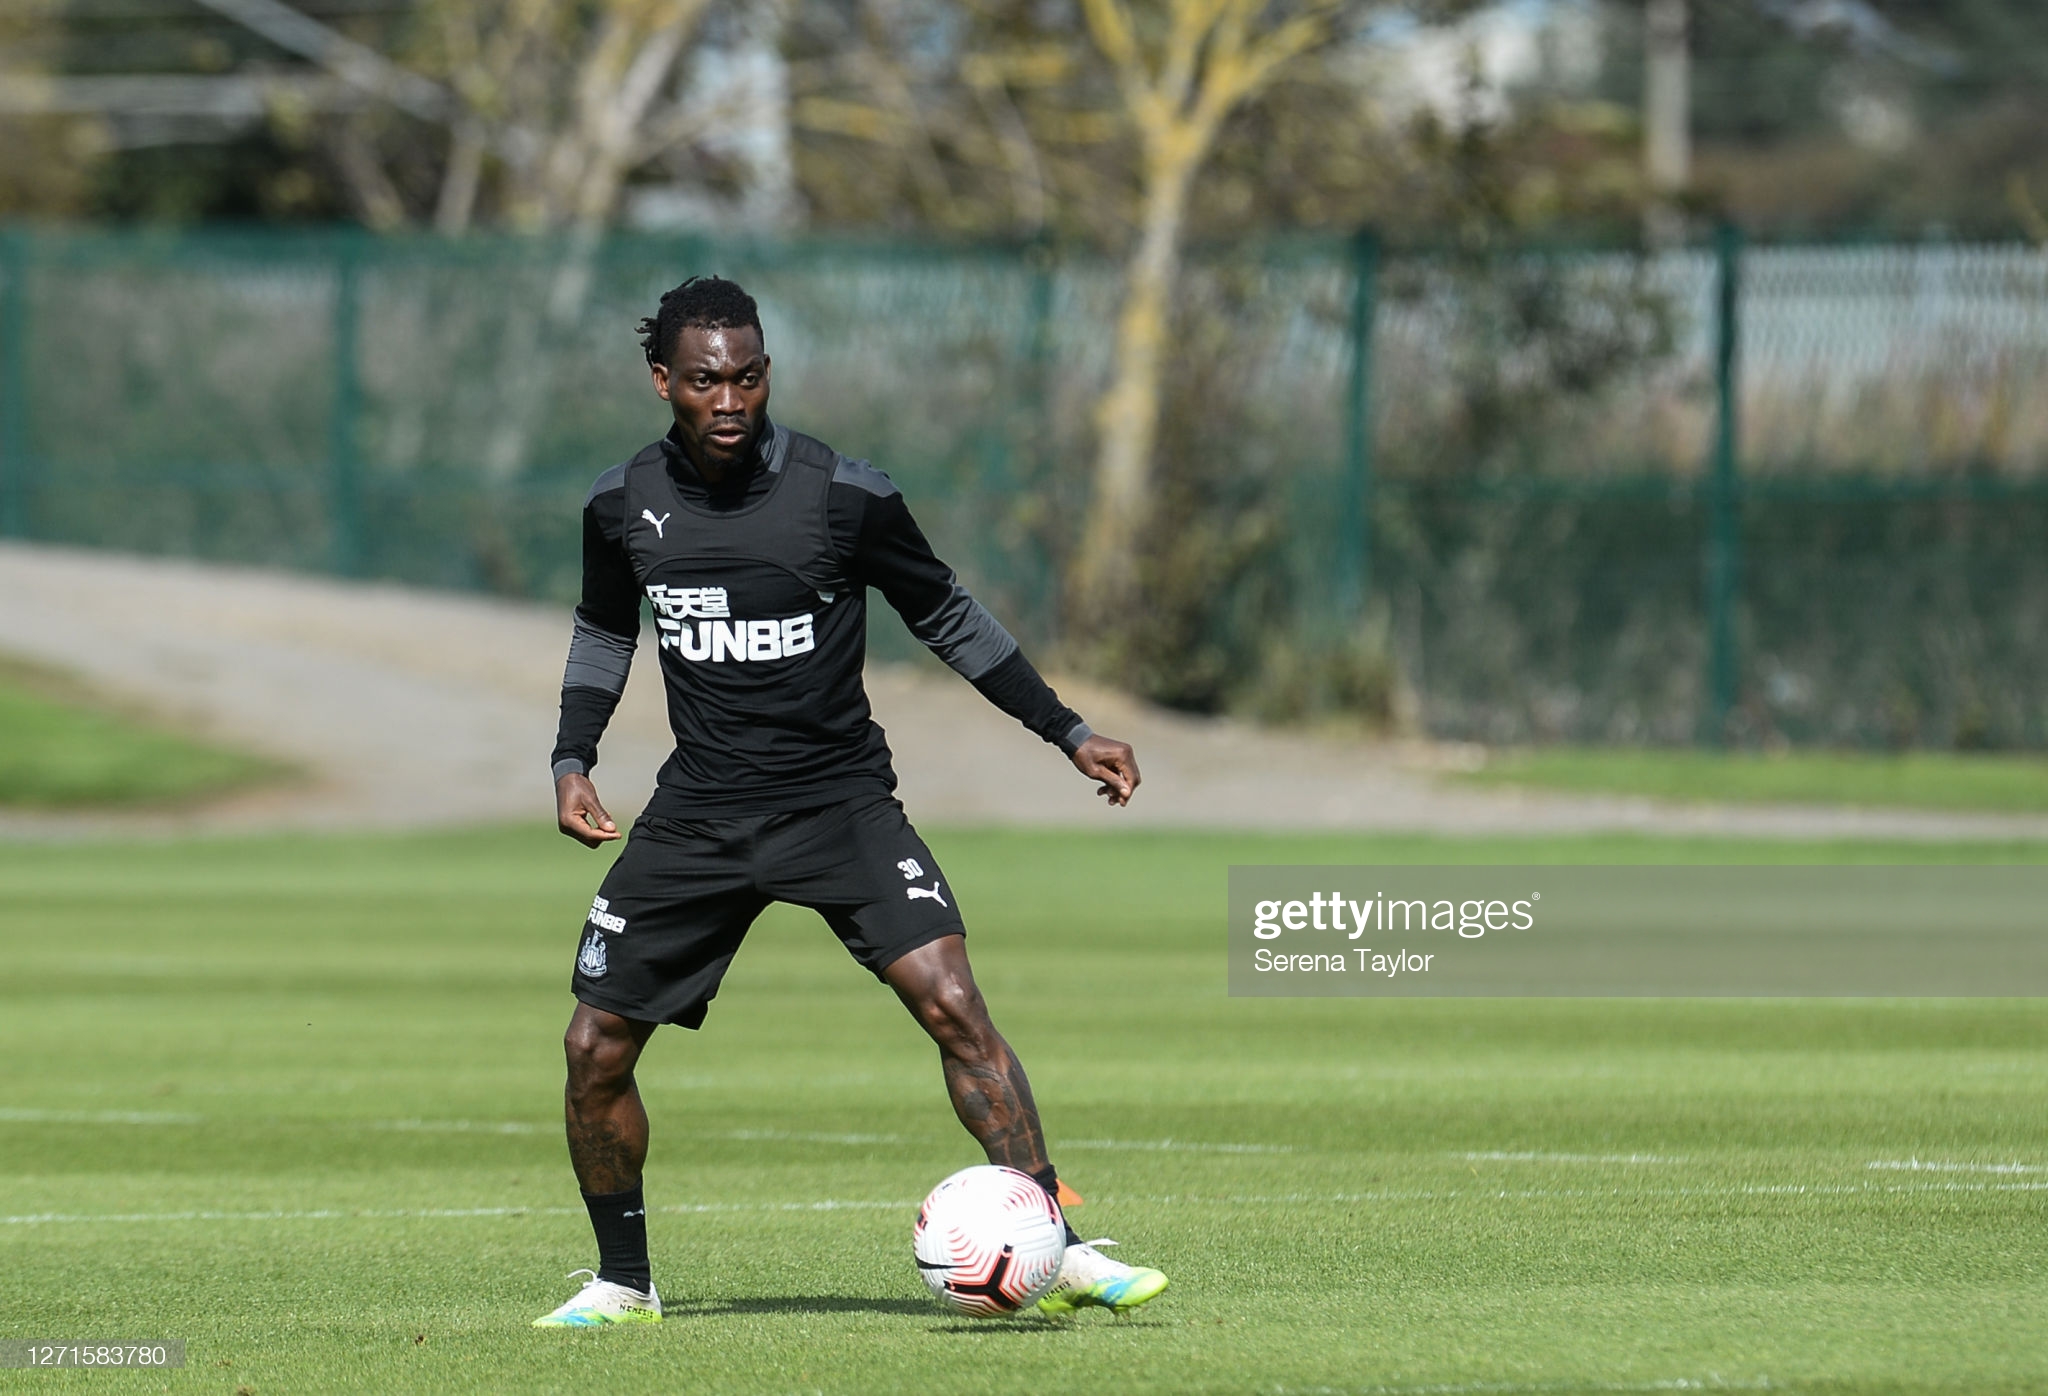 Christian Atsu's death confirmed by his agent Nana Sechere